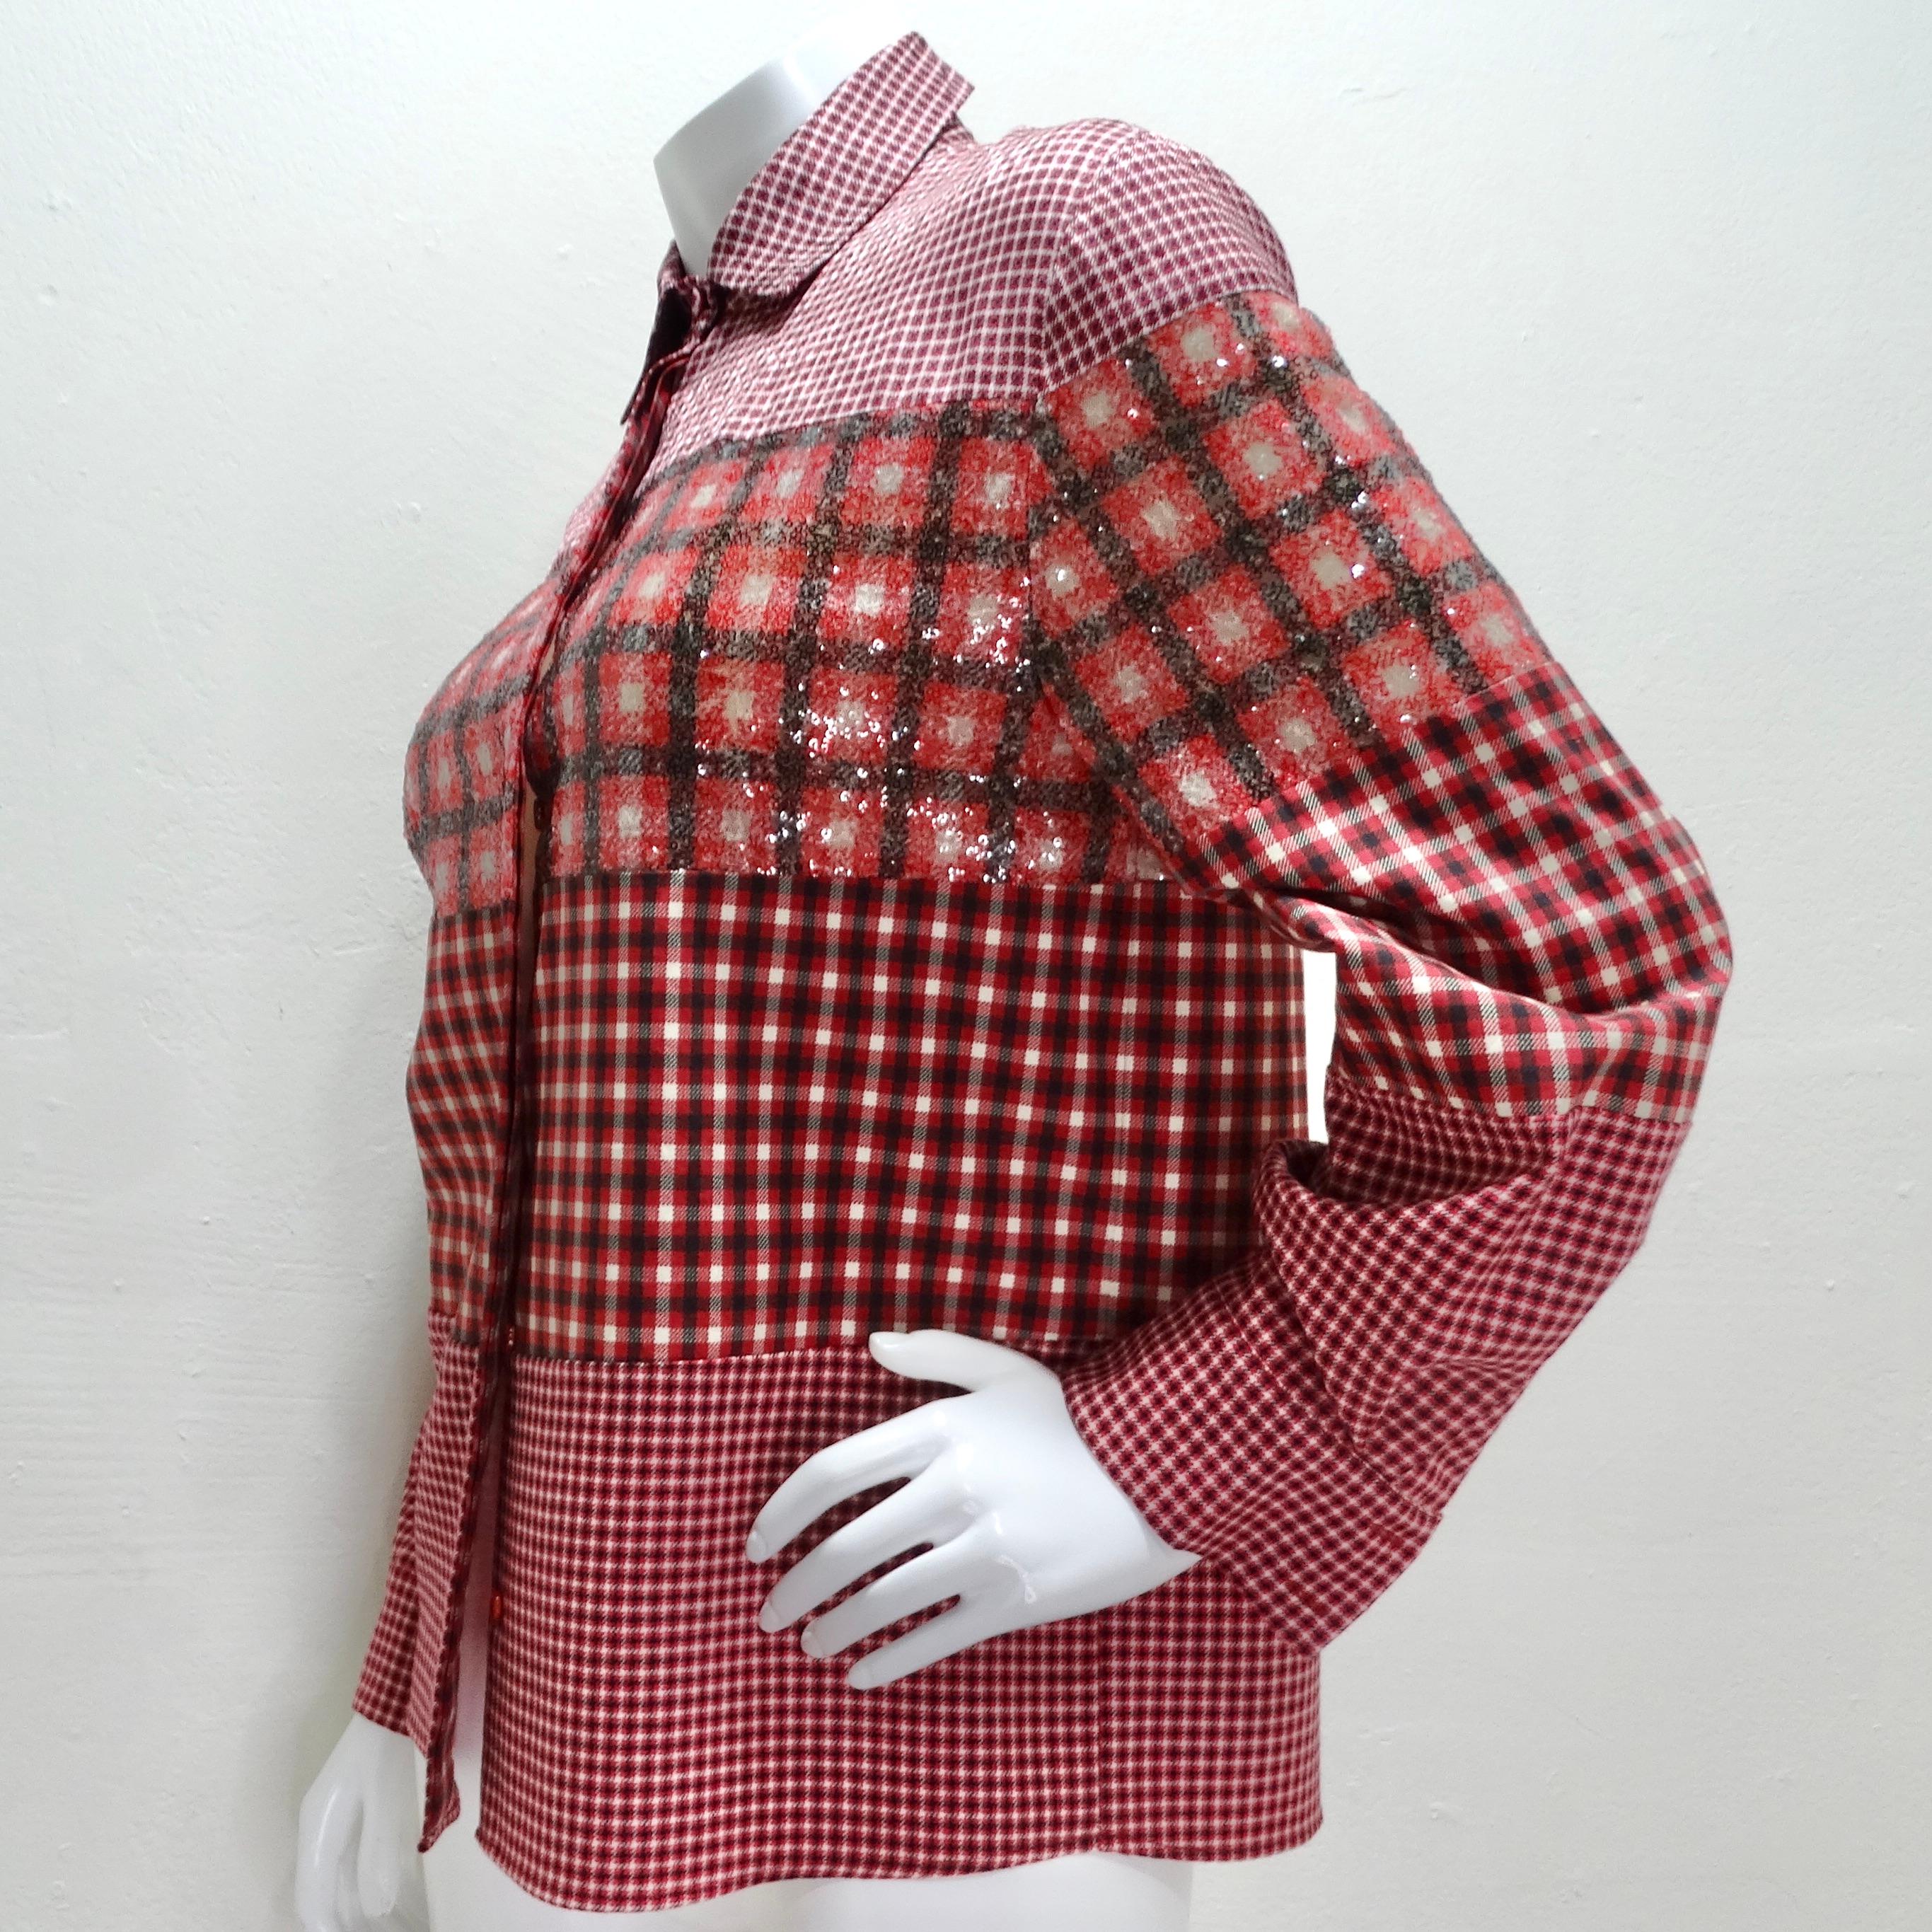 Fendi Red Plaid Sequin Button-Up Shirt In Excellent Condition For Sale In Scottsdale, AZ